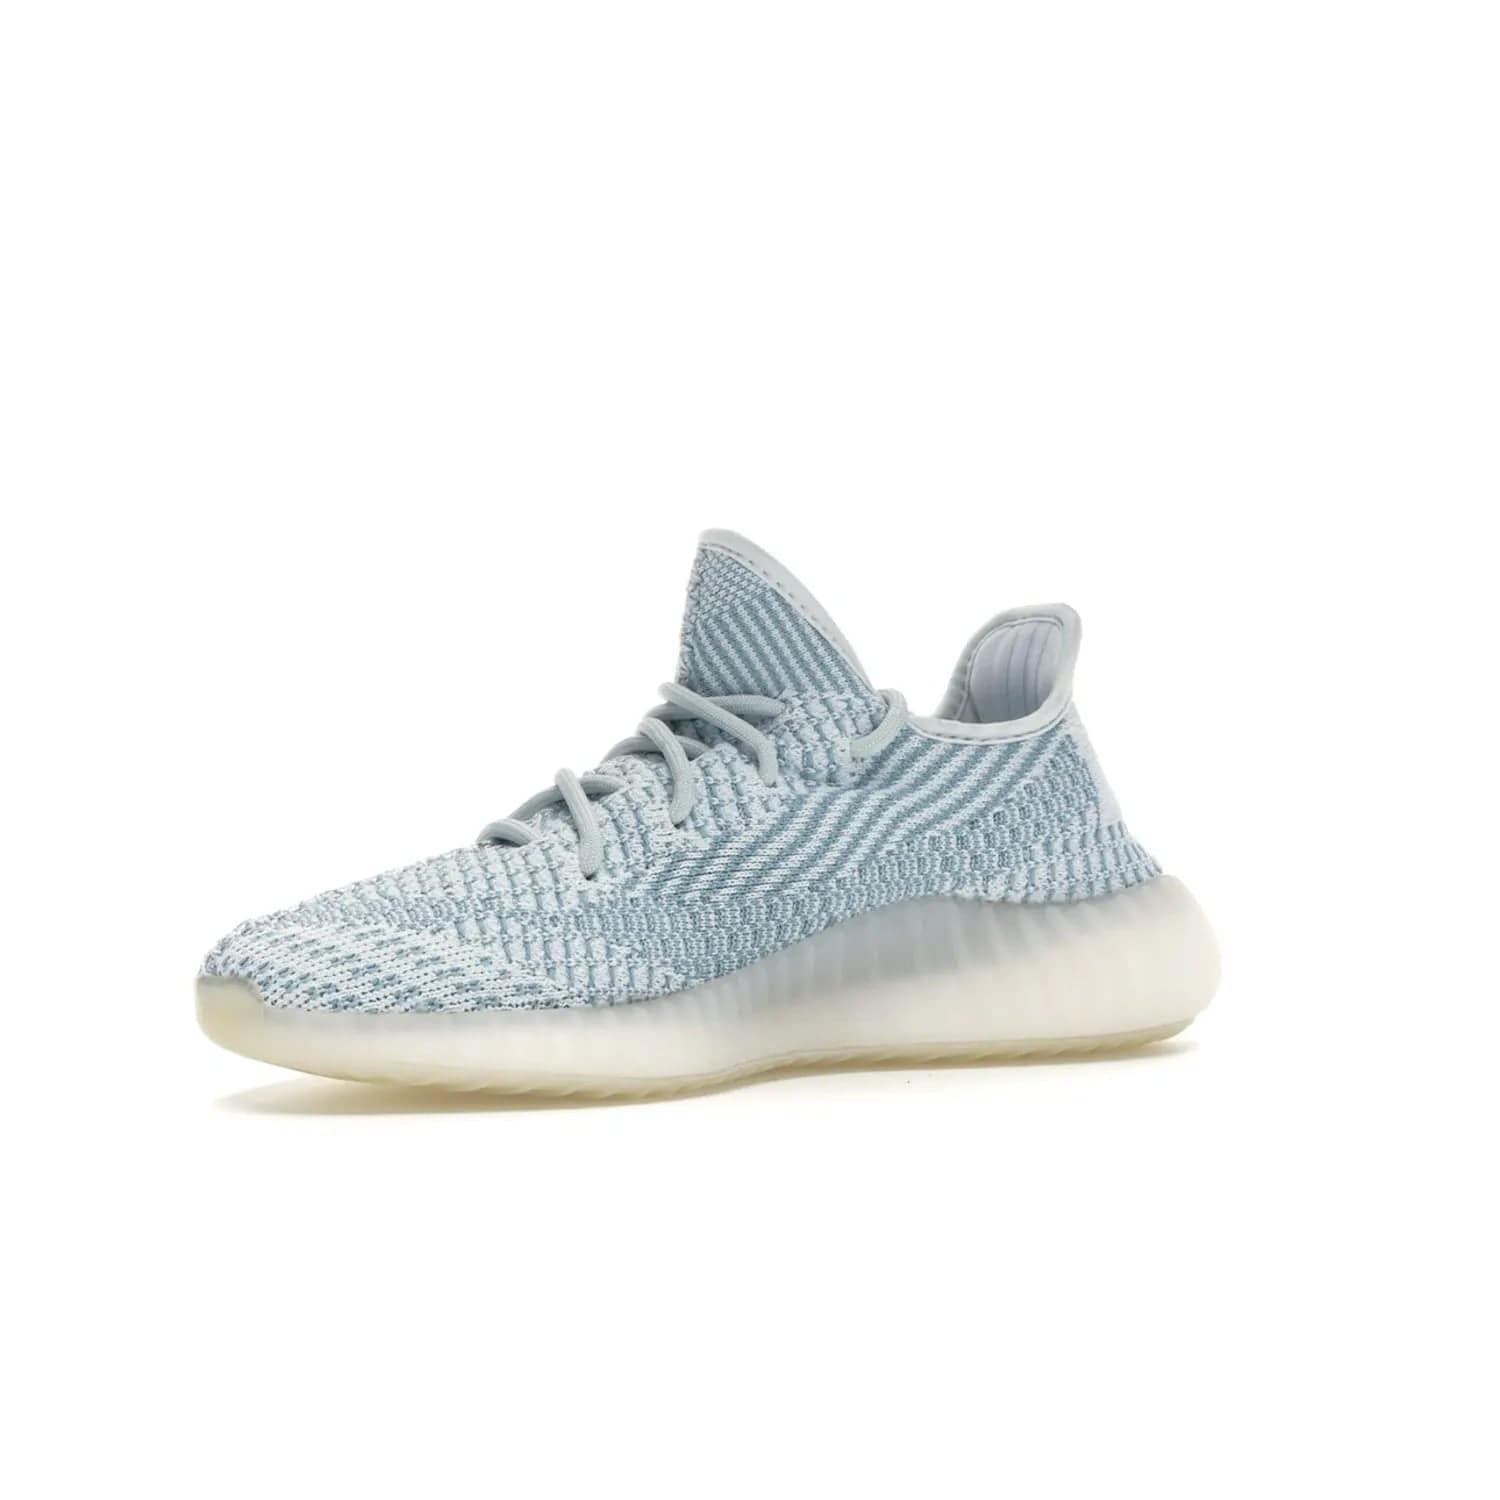 adidas Yeezy Boost 350 V2 Cloud White (Non-Reflective) - Image 16 - Only at www.BallersClubKickz.com - Uniquely designed adidas Yeezy Boost 350 V2 Cloud White (Non-Reflective) with a Primeknit upper in shades of cream and blue with a contrasting hard sole. A fashion-forward sneaker with a transparent strip and blue-and-white patterns.